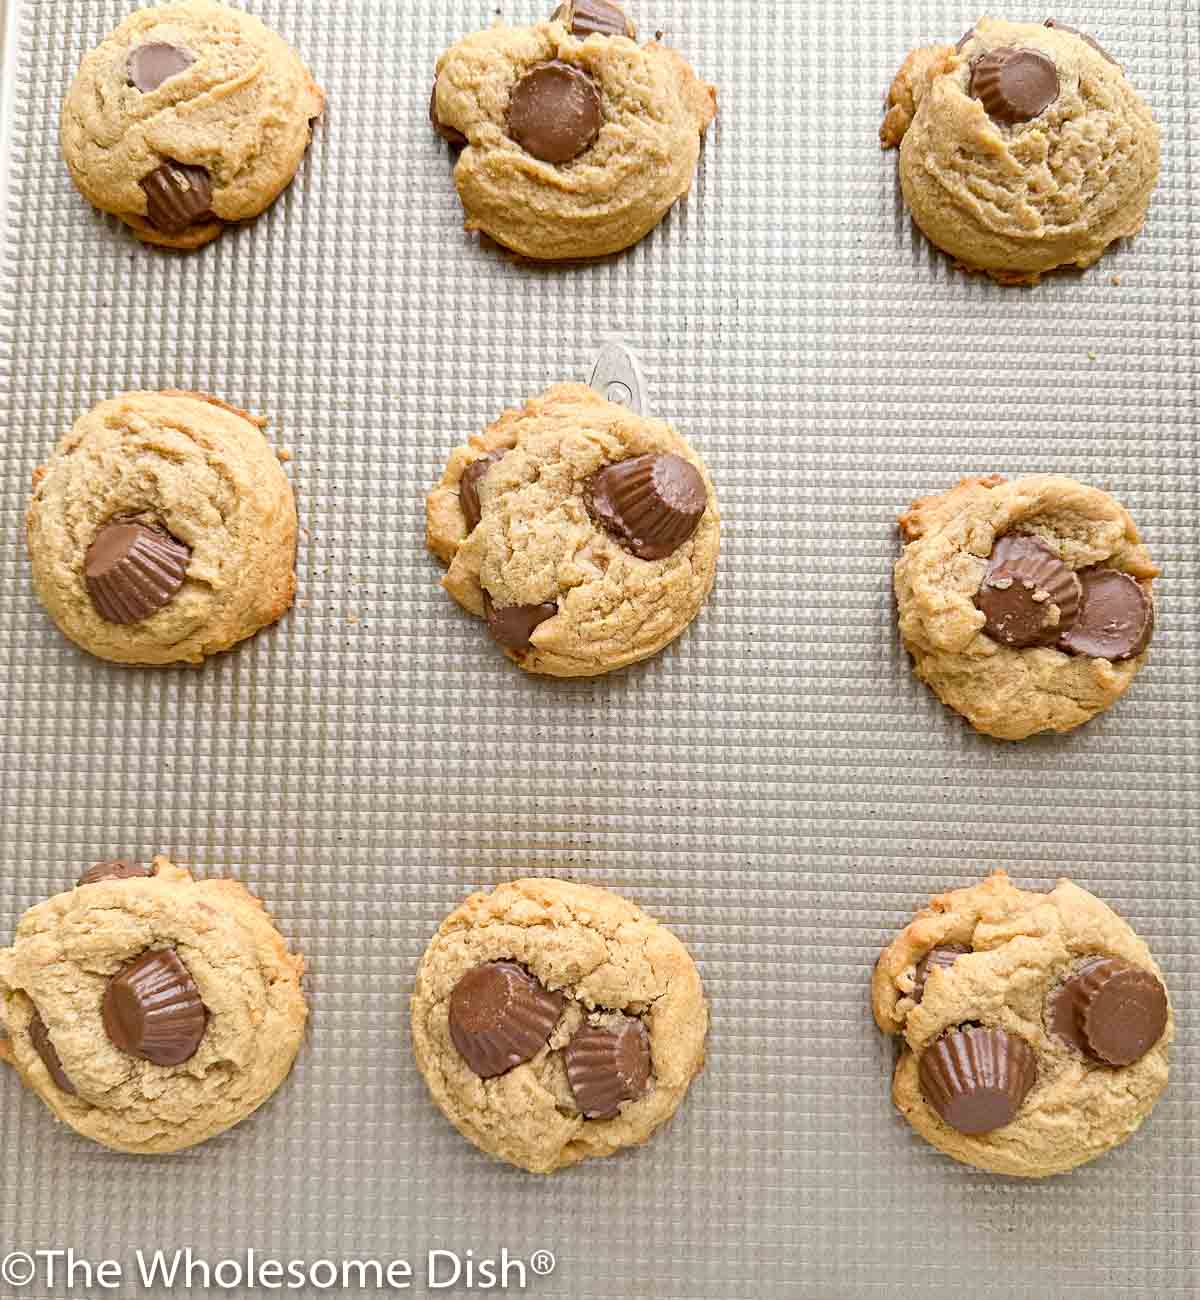 Baked peanut butter cup cookies on a baking sheet.